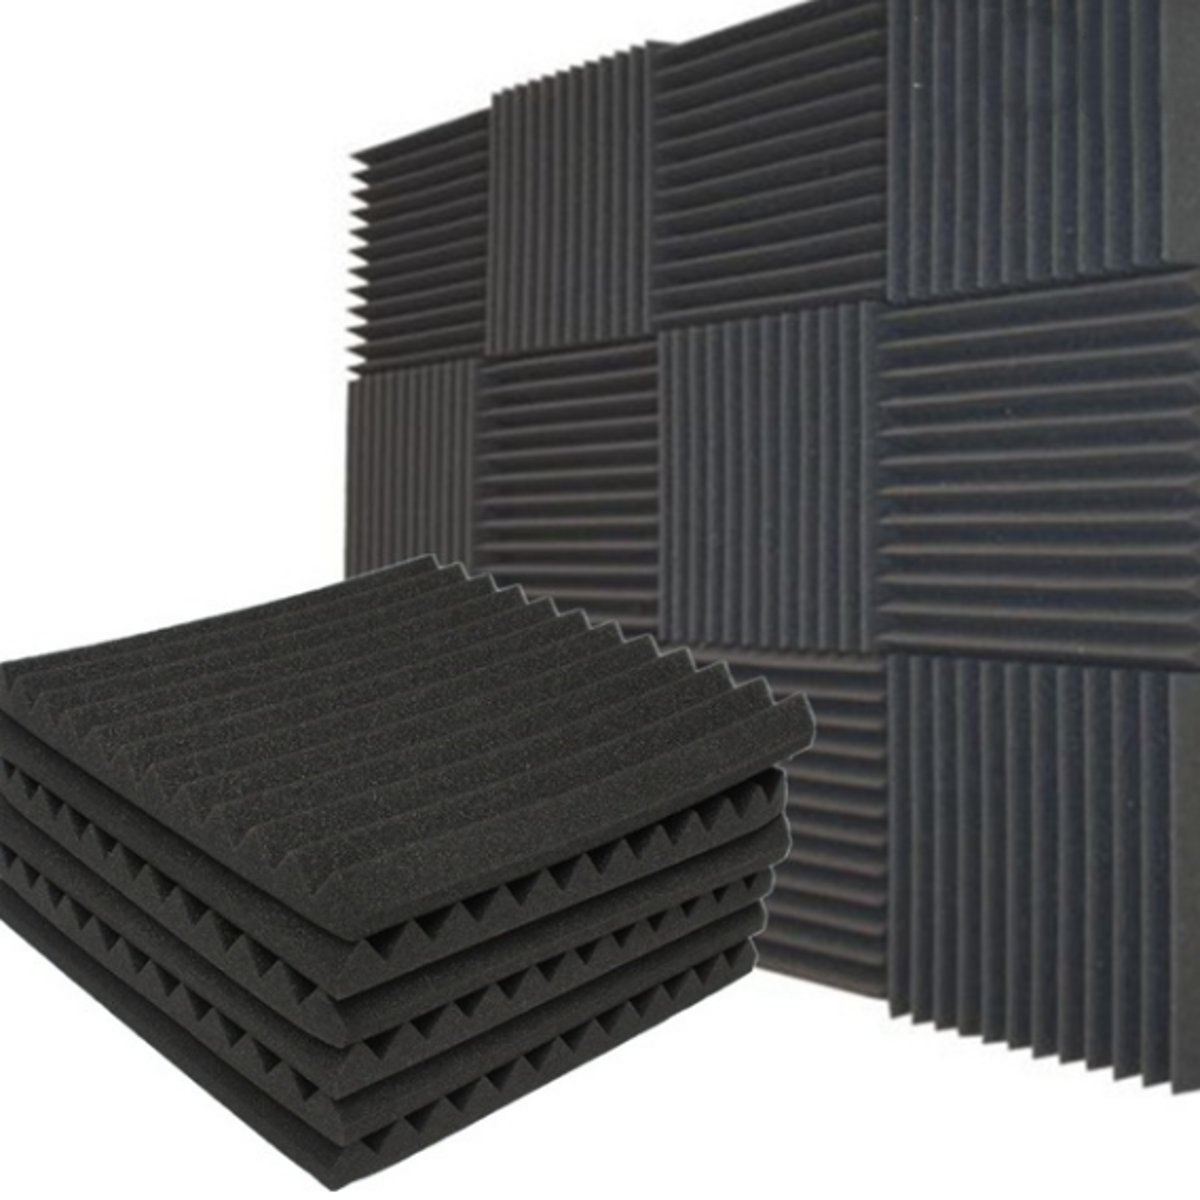 

Studio Acoustic Soundproof Foam Panel Tile Sound Absorption Proofing Treatment Wedge 30x30